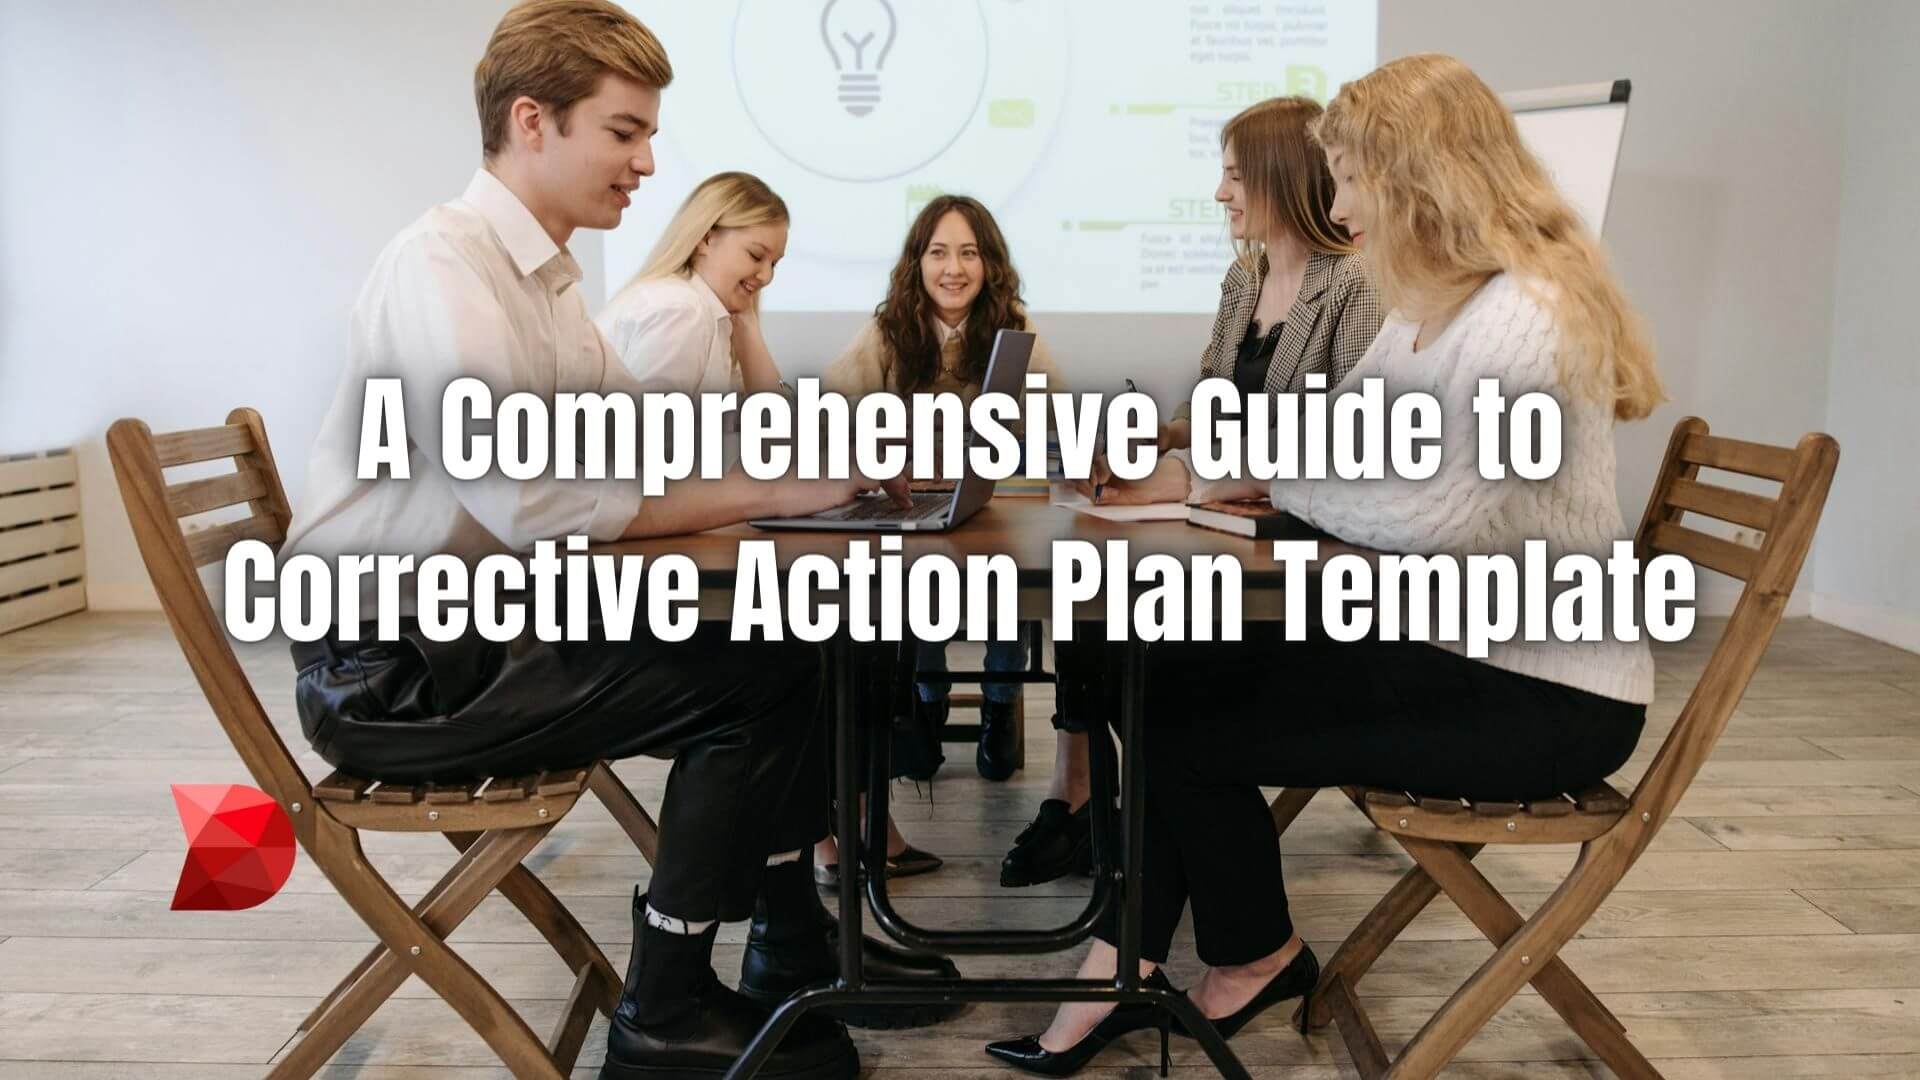 Master corrective actions effortlessly. Click here to explore our corrective action plan template guide for expert insights and templates.